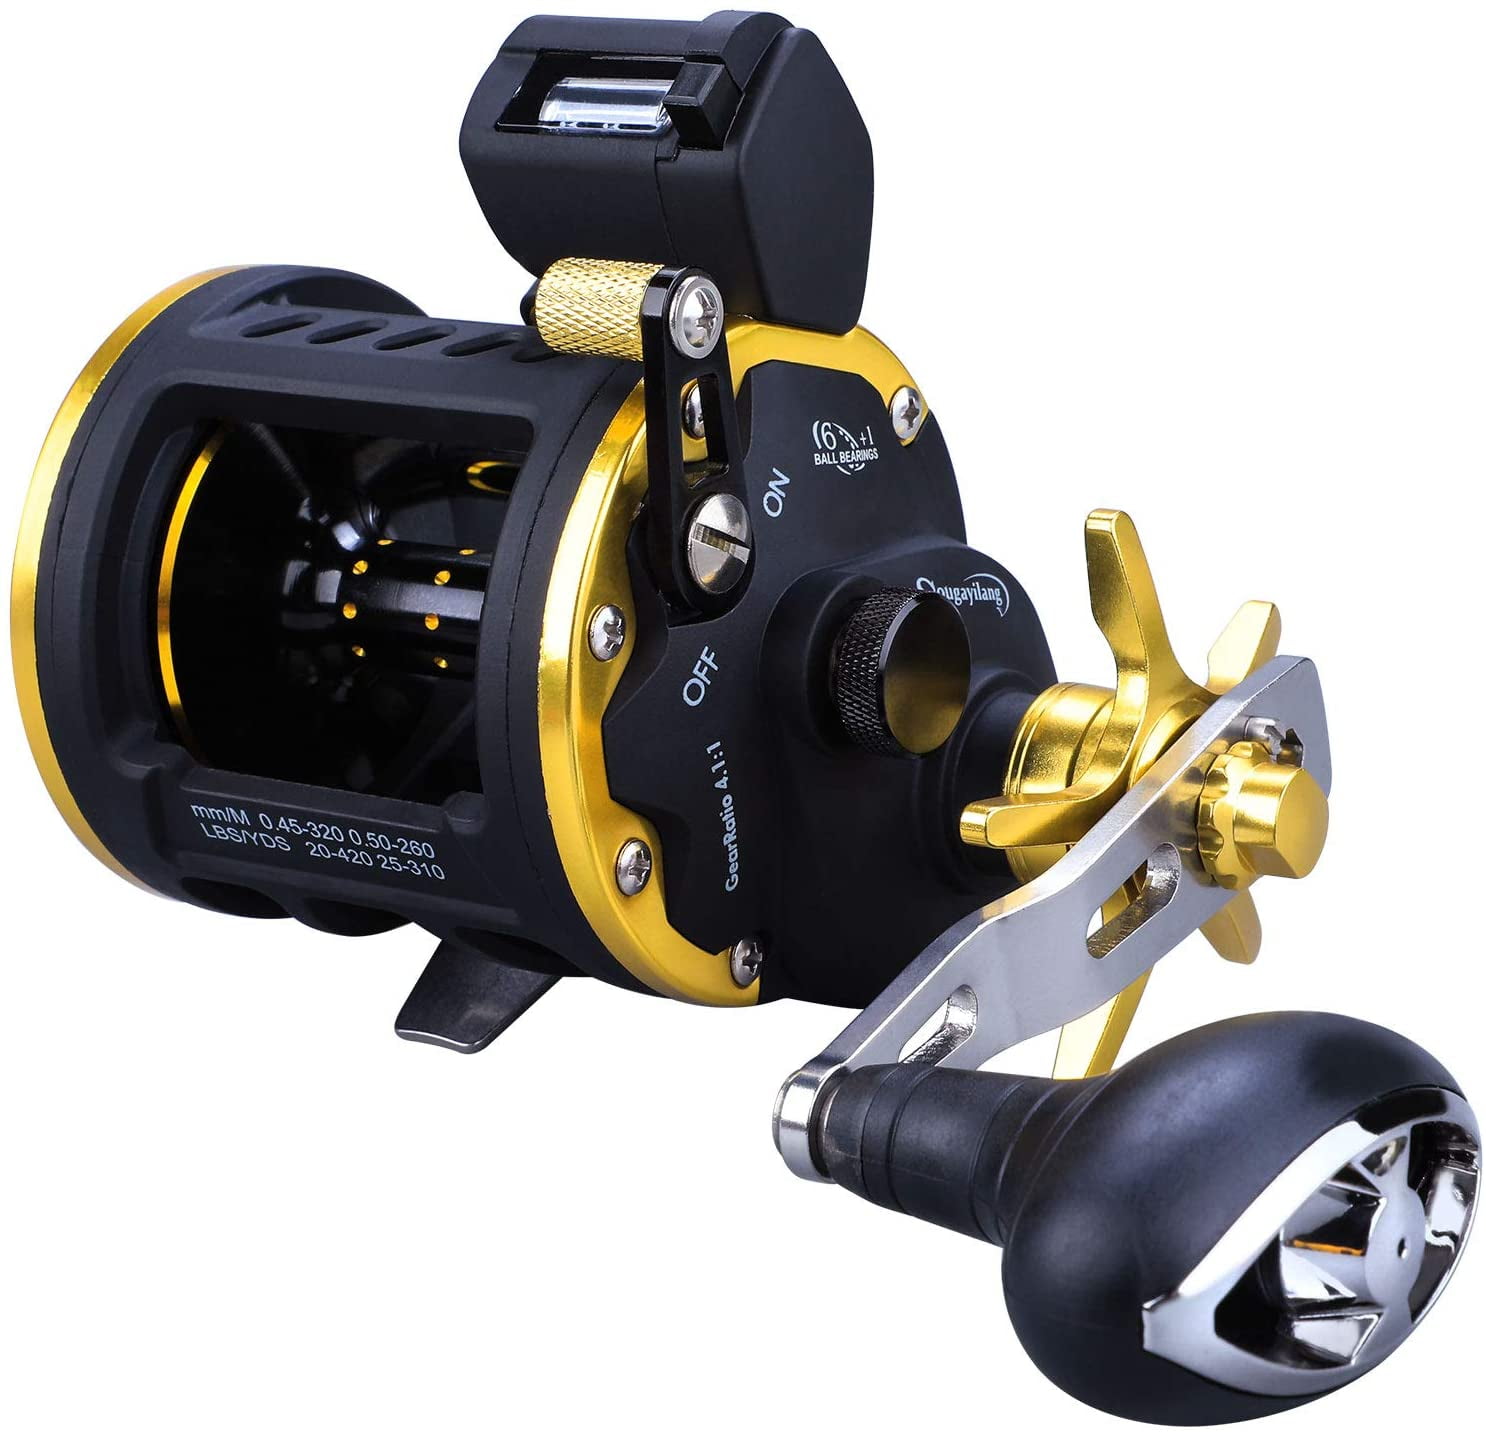 4+1 BB Trolling Fishing Reel with Line Counter Saltwater Sea Bait Casting Reel 